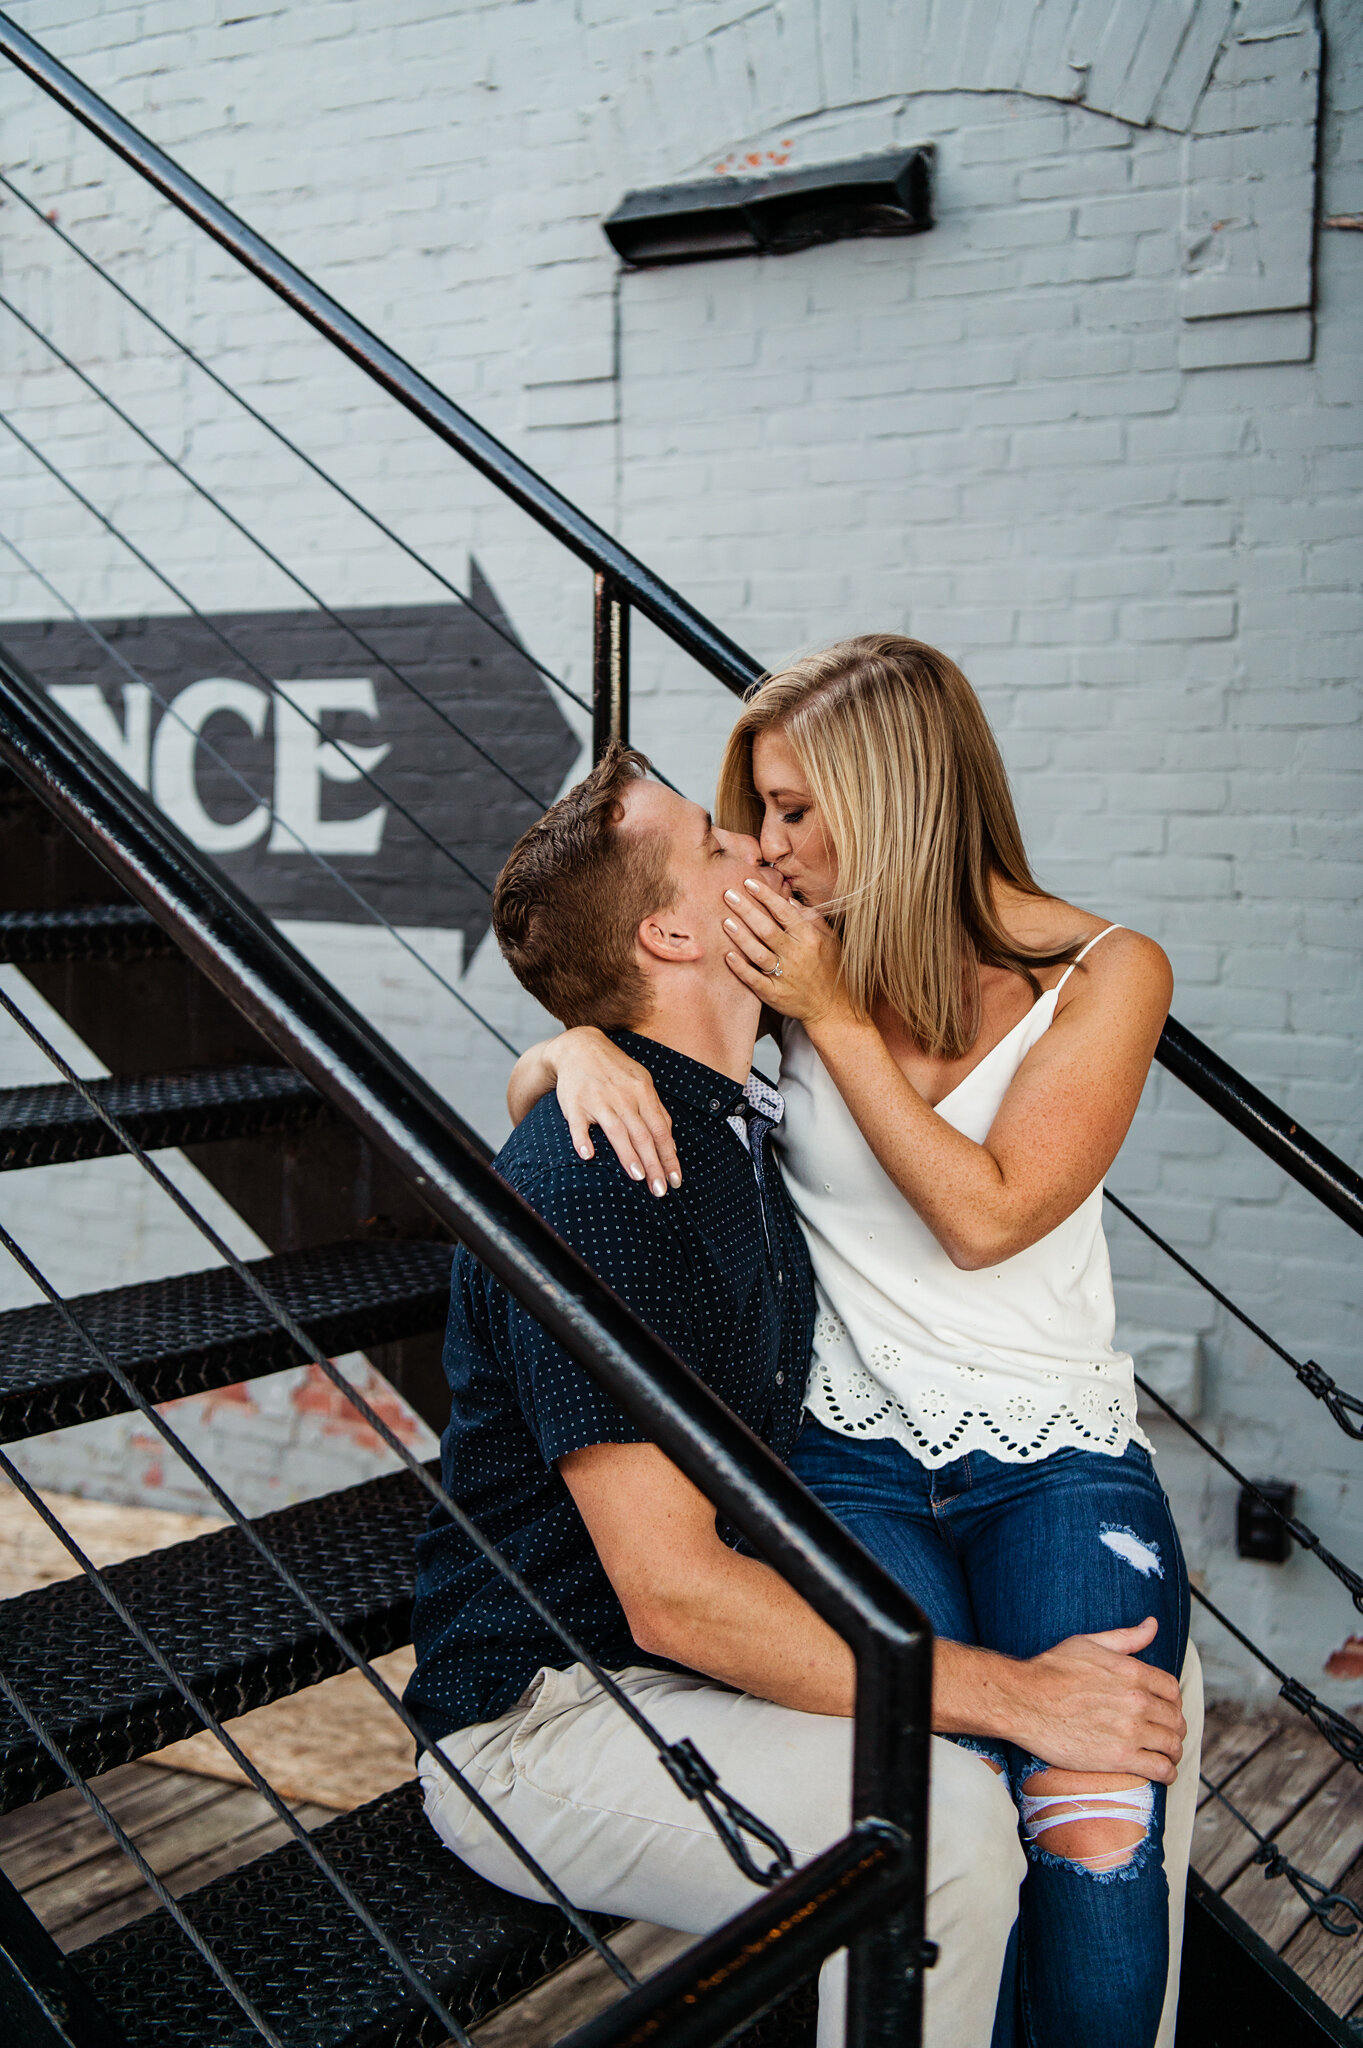 Genesee_Brew_House_High_Falls_Rochester_Engagement_Session_JILL_STUDIO_Rochester_NY_Photographer_5474.jpg